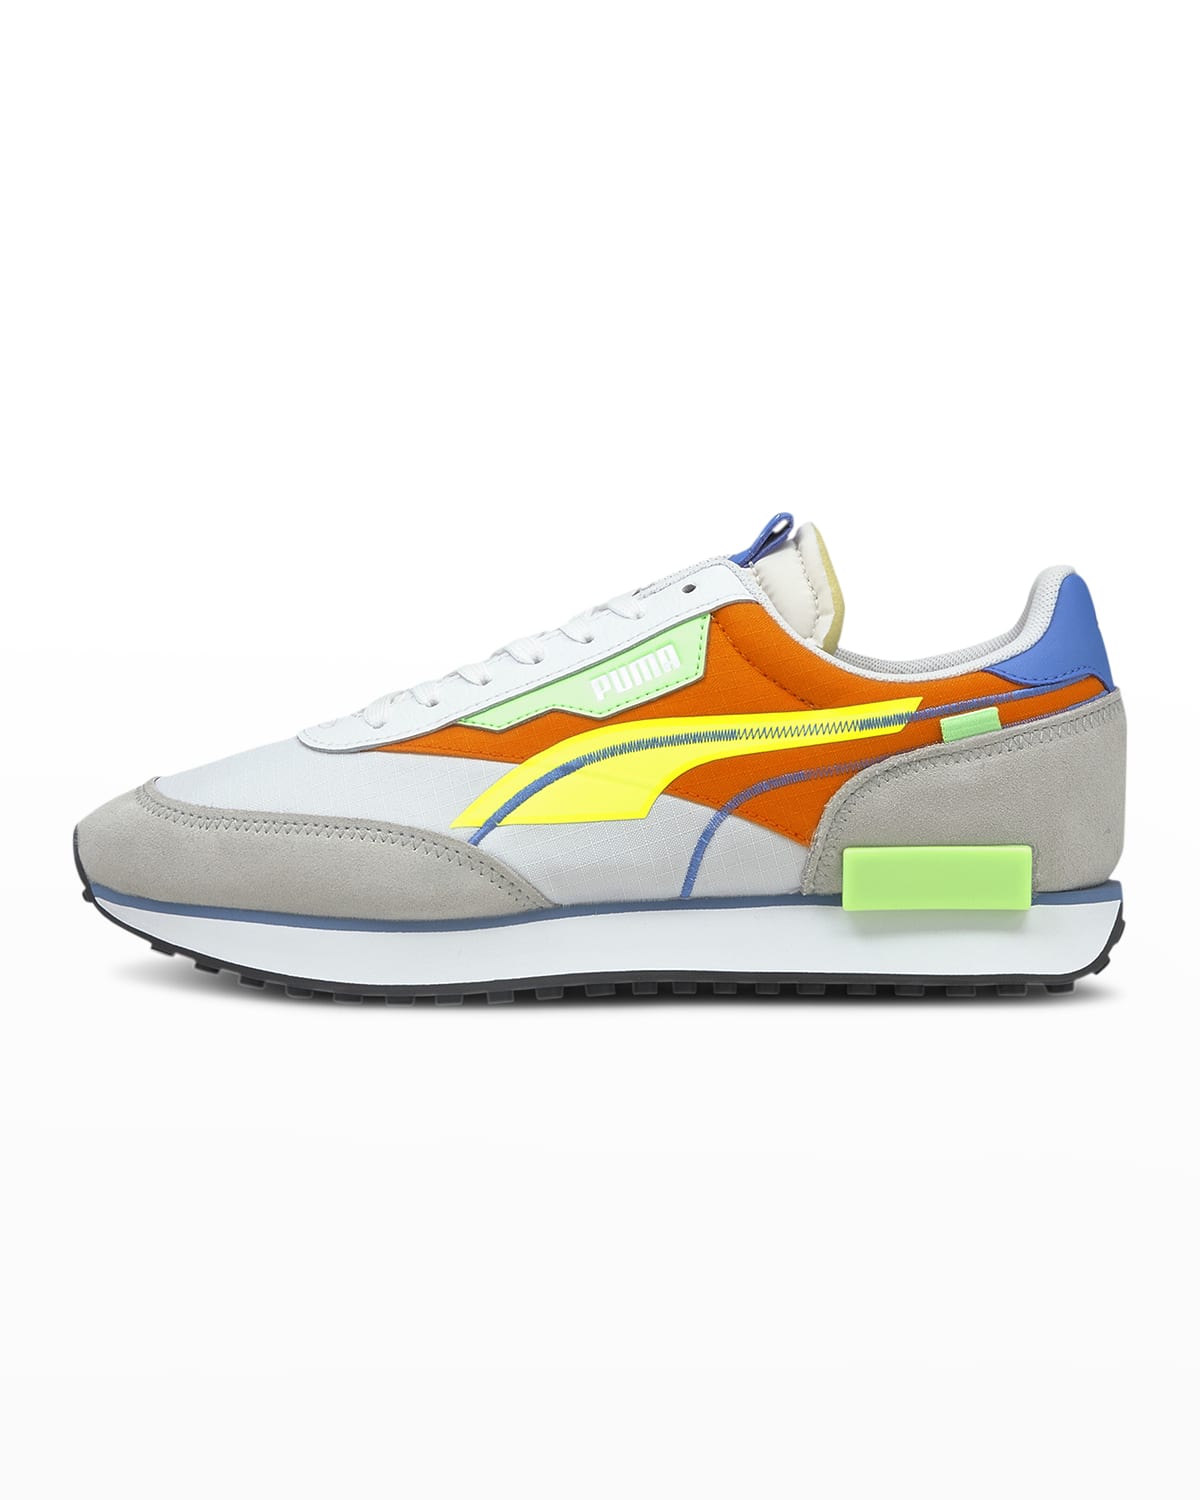 Puma Men's RS-X Colour Theory Trainer Sneakers | Neiman Marcus